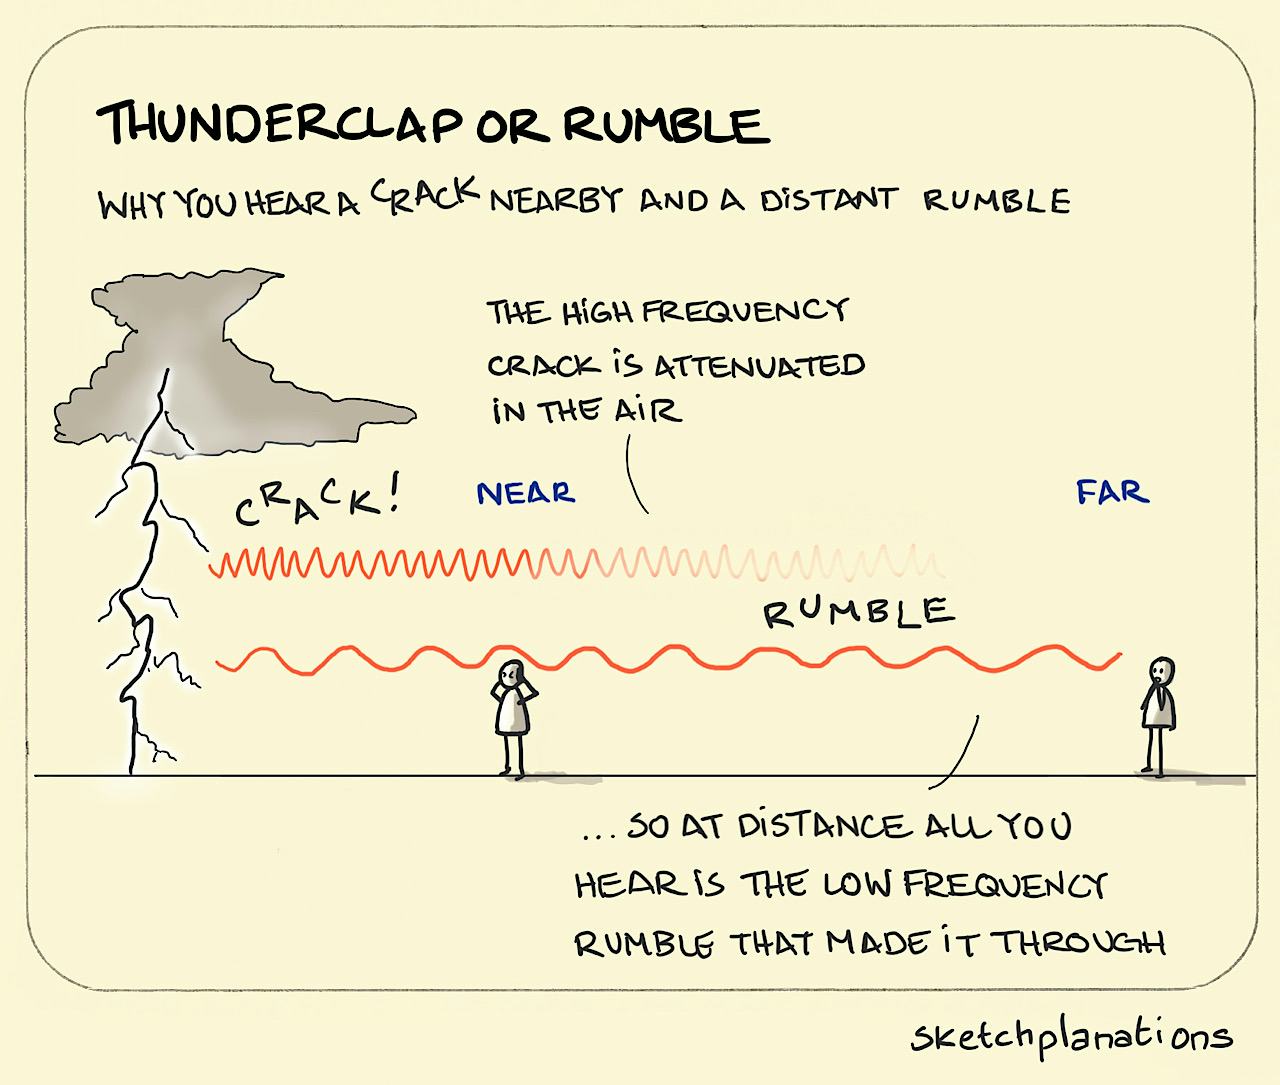 Thunderclap or rumble - Sketchplanations